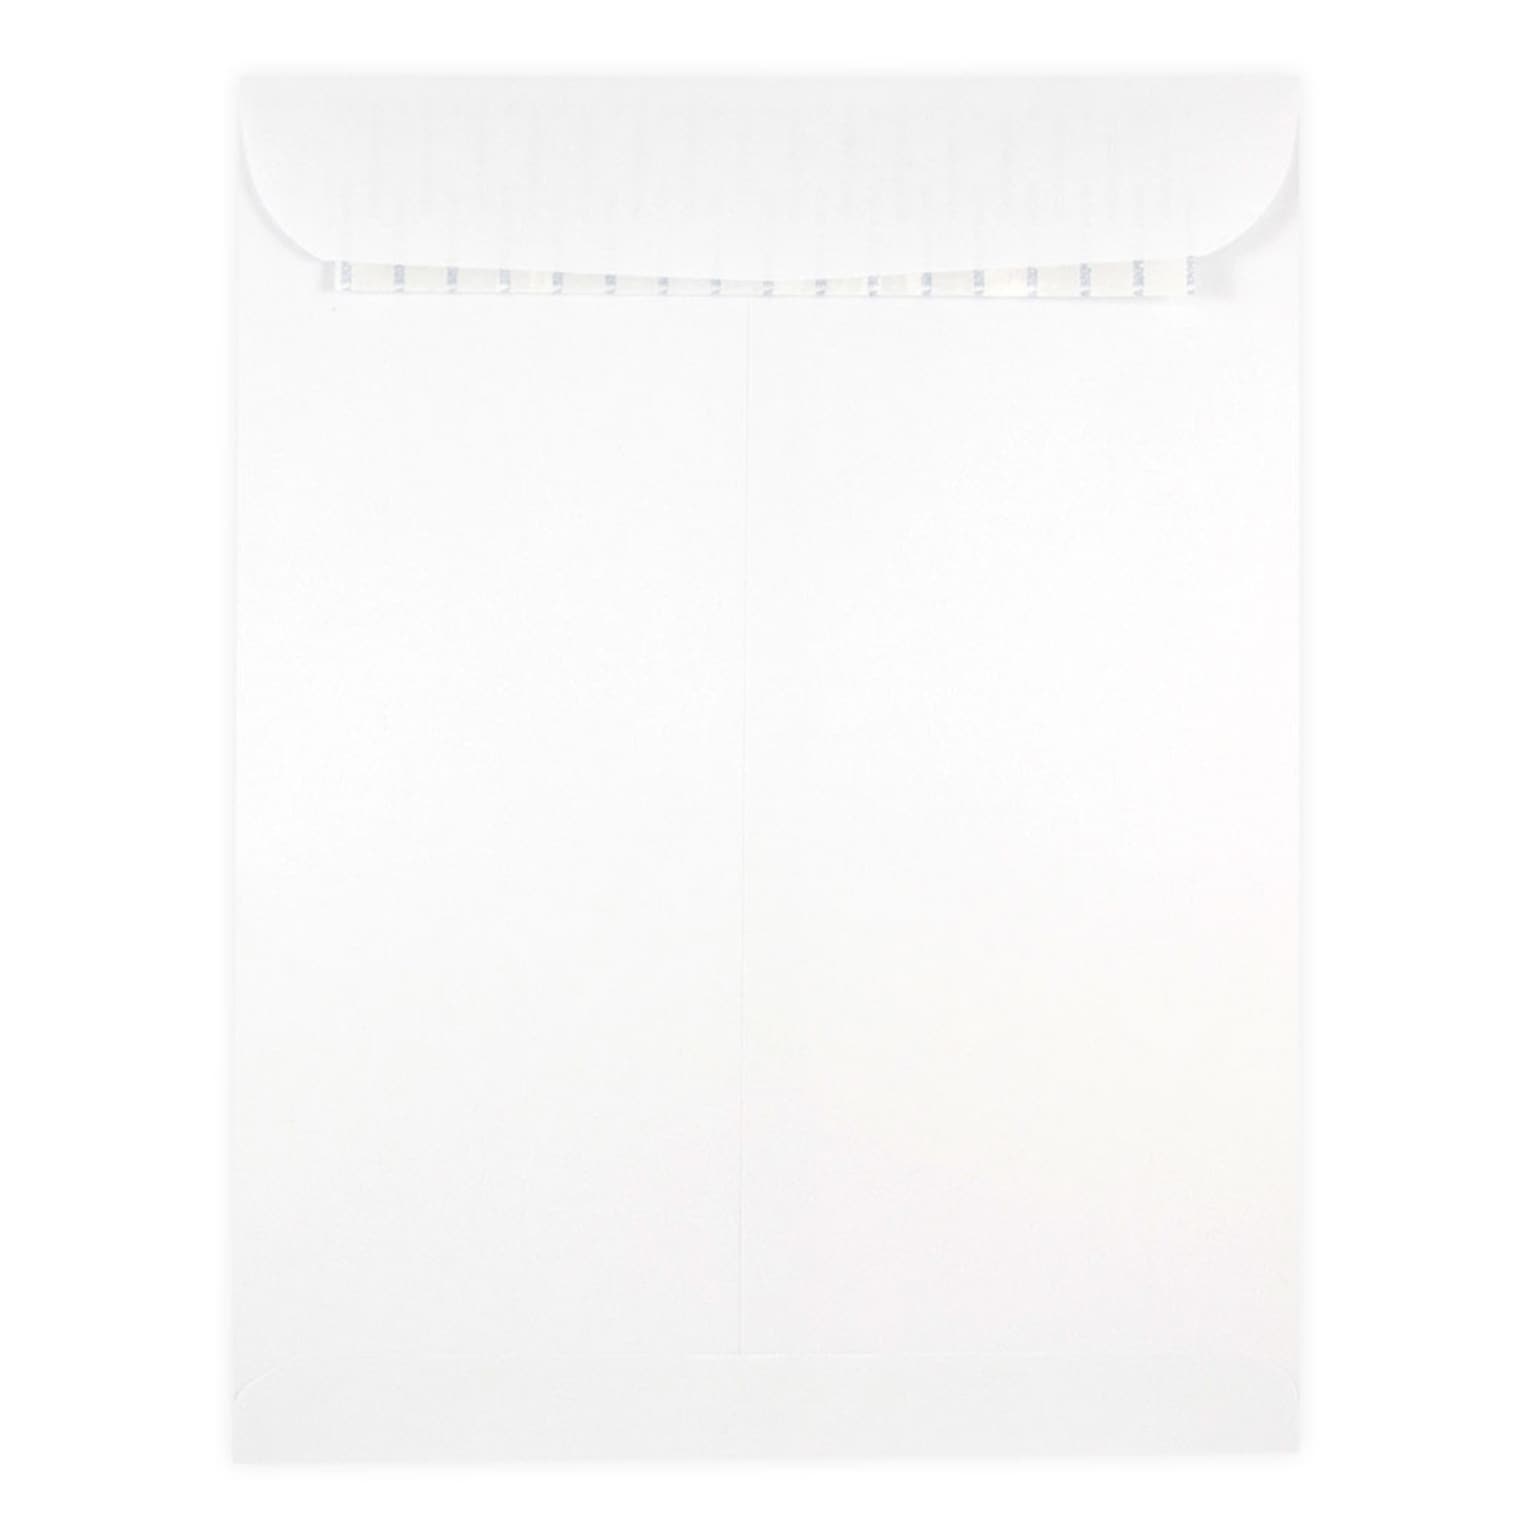 JAM Paper® 9 x 12 Open End Catalog Envelopes with Peel and Seal Closure, White, 25/Pack (356828780A)